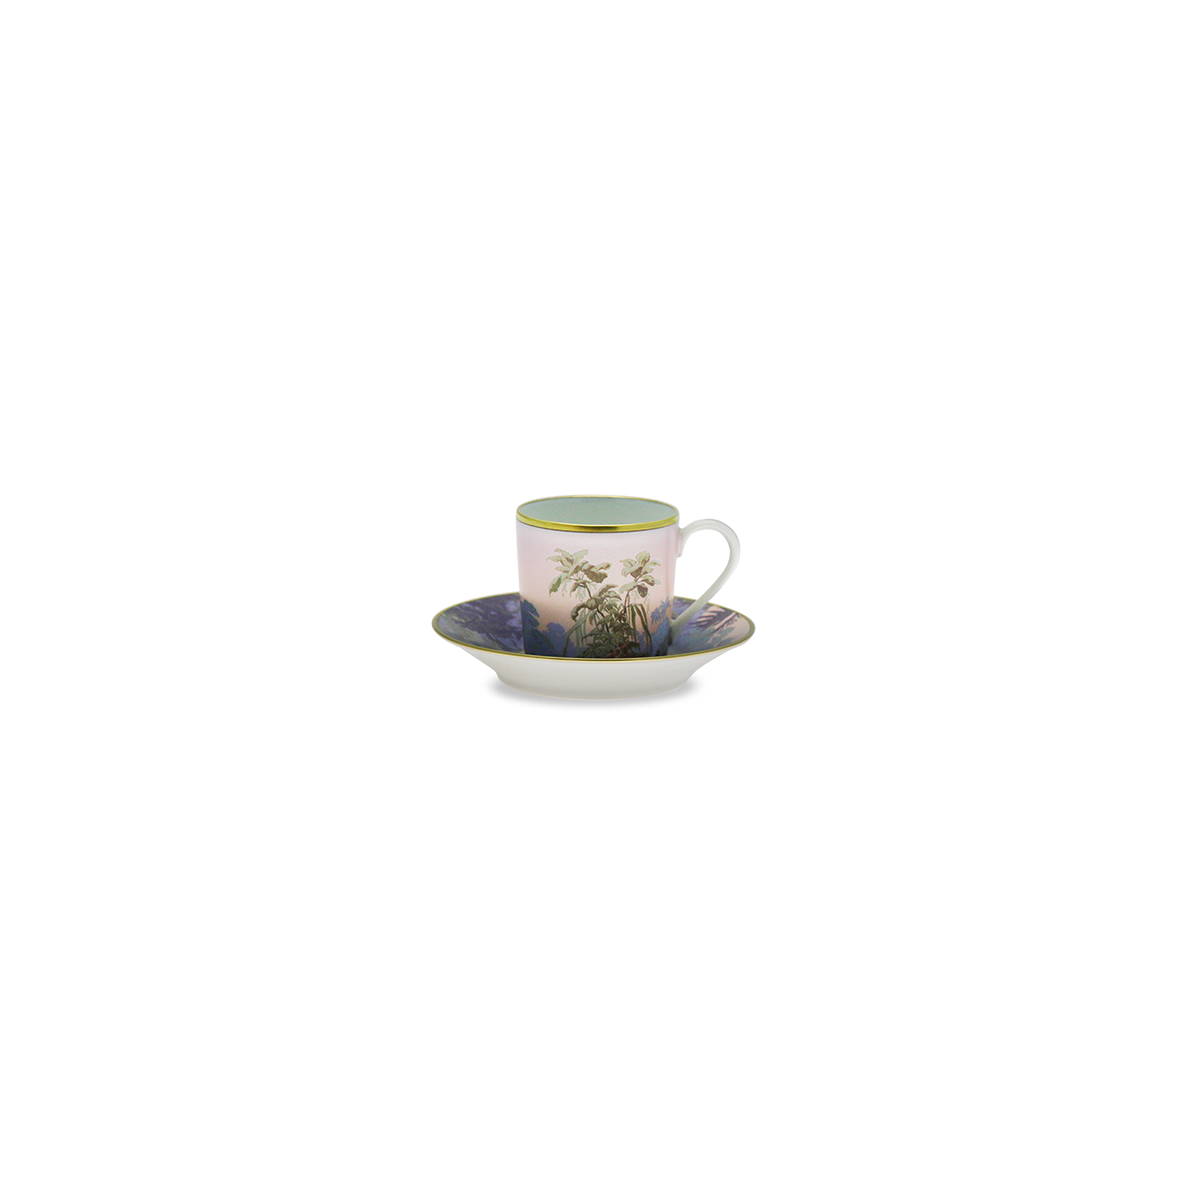 Le Bresil Coffee Cup & Saucer